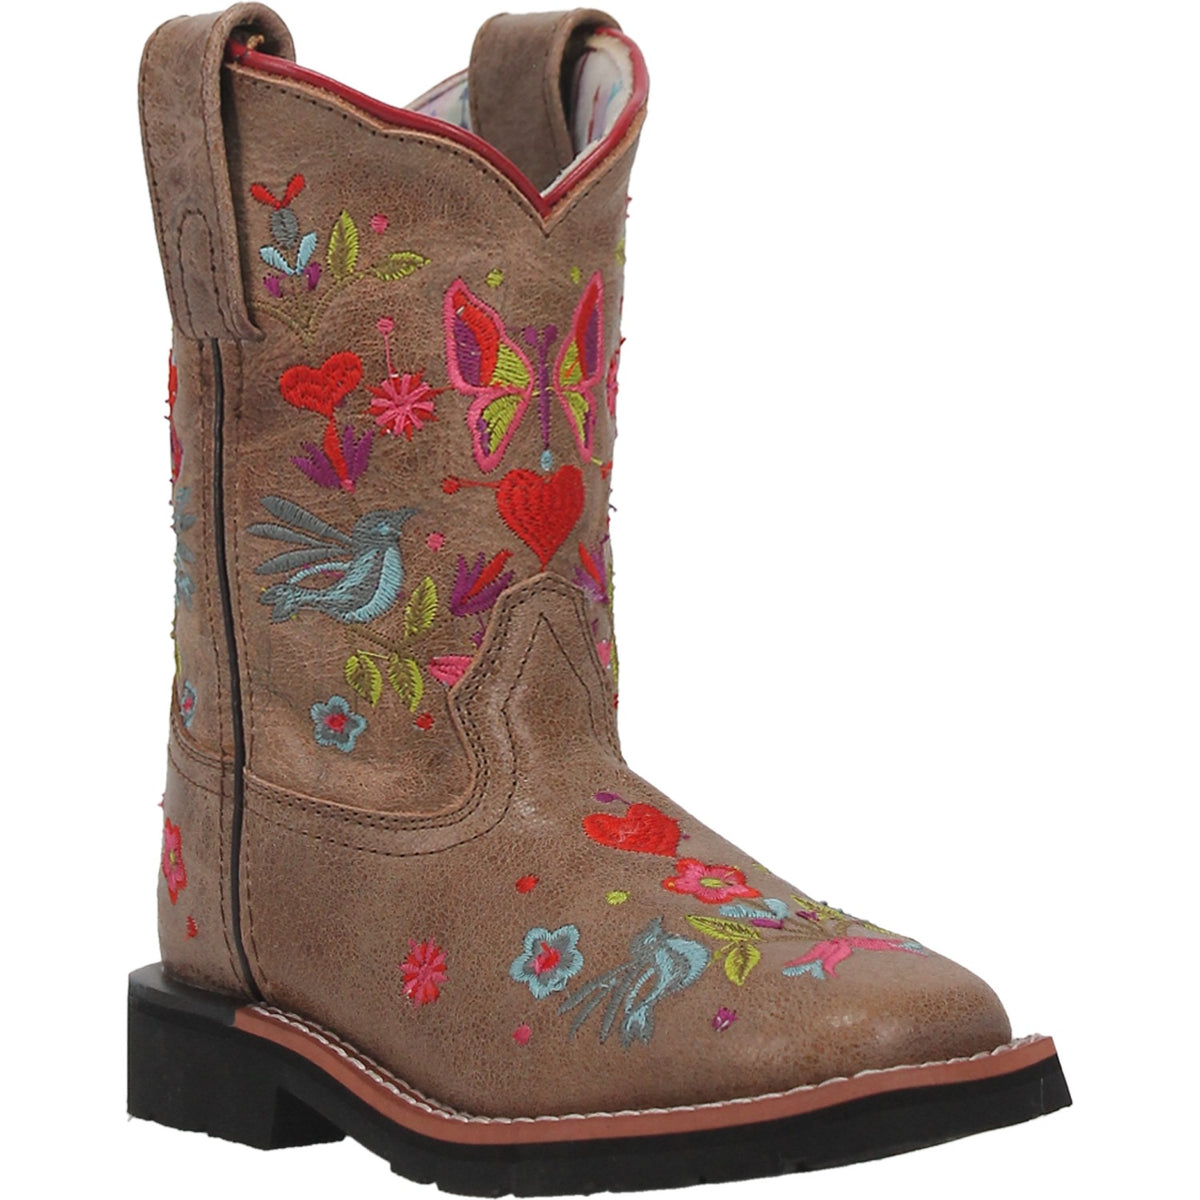 FLEUR LEATHER CHILDREN'S BOOT Cover